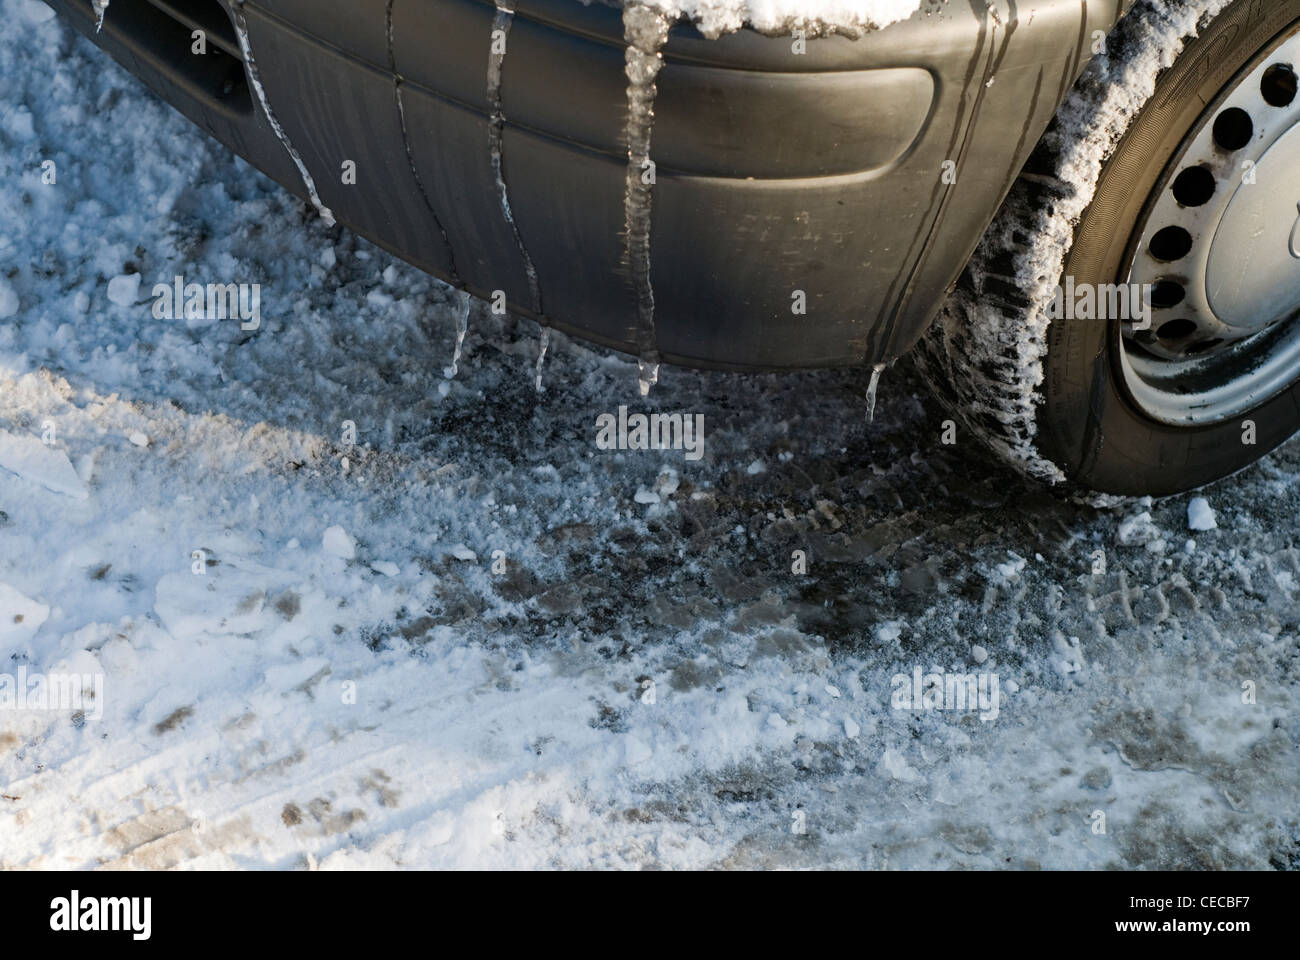 Detail of an icy car parked on a snowy road in winter Stock Photo